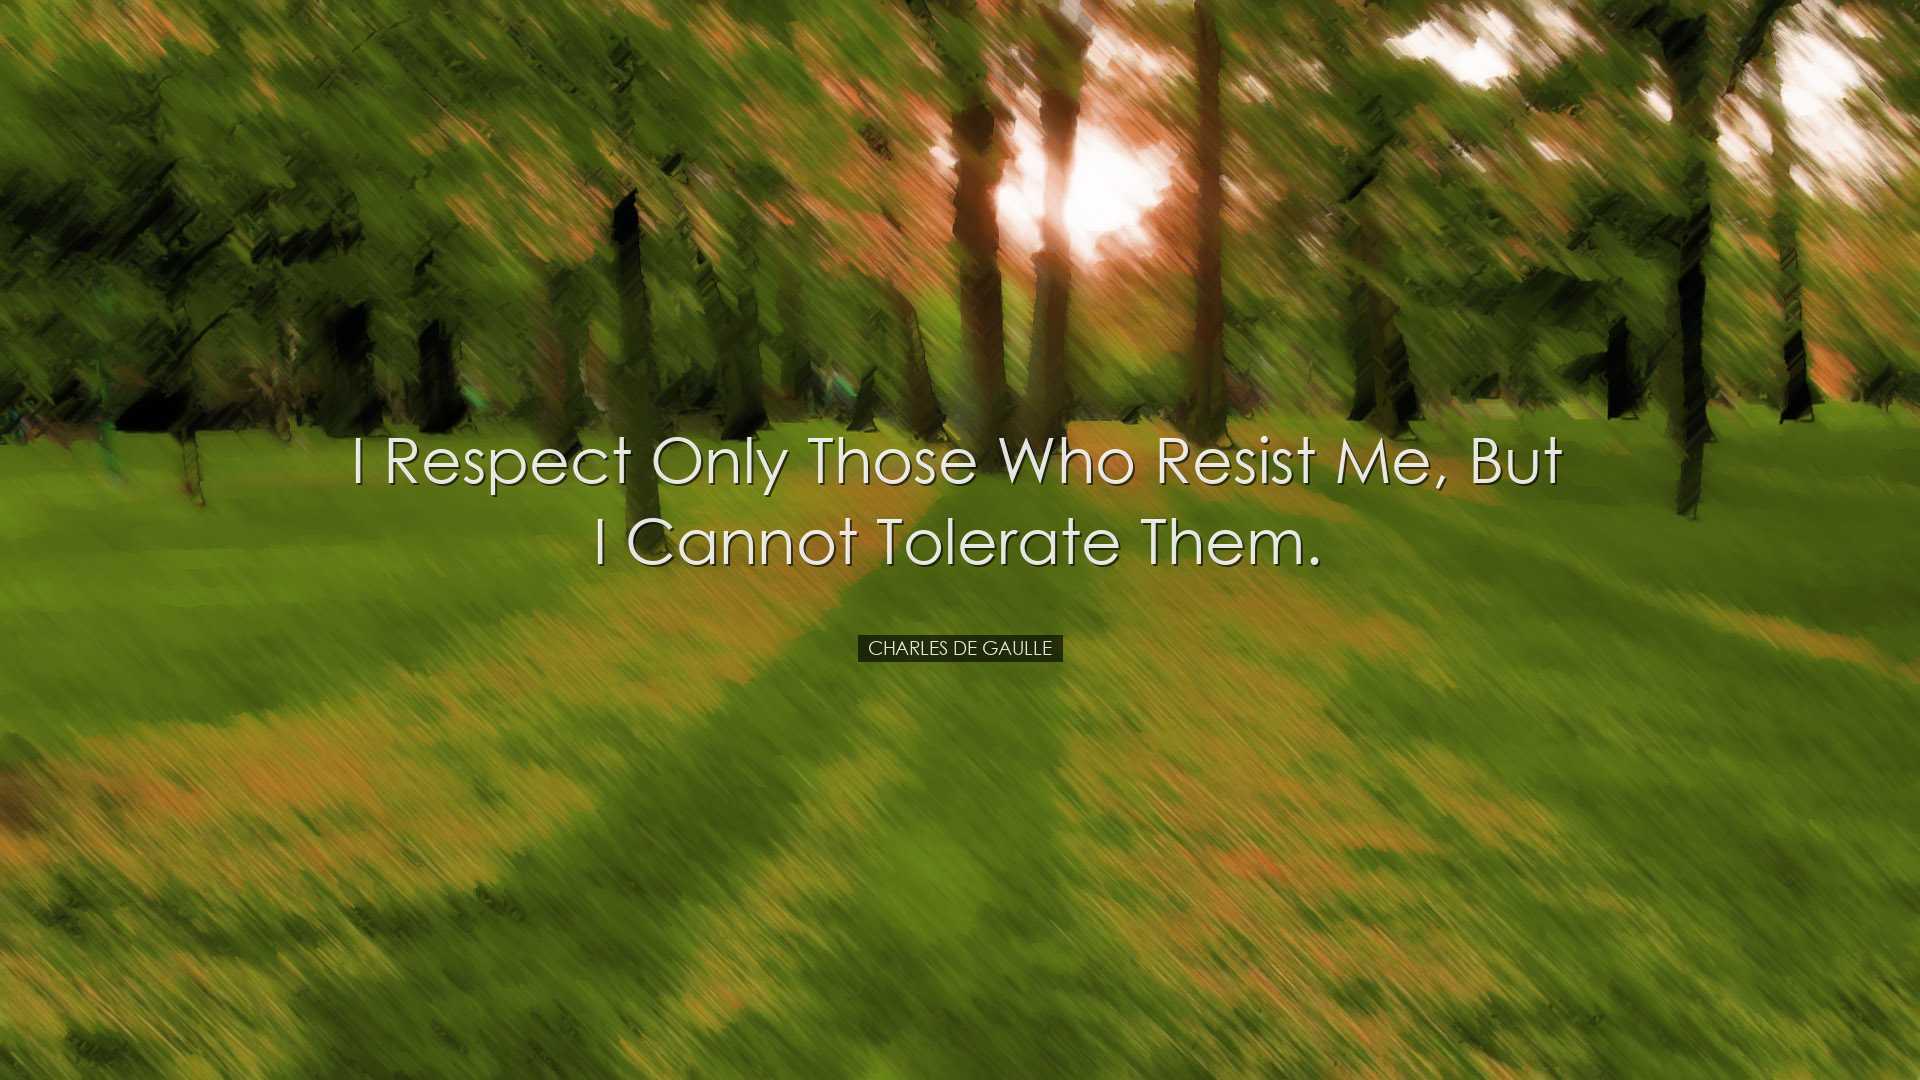 I respect only those who resist me, but I cannot tolerate them. -